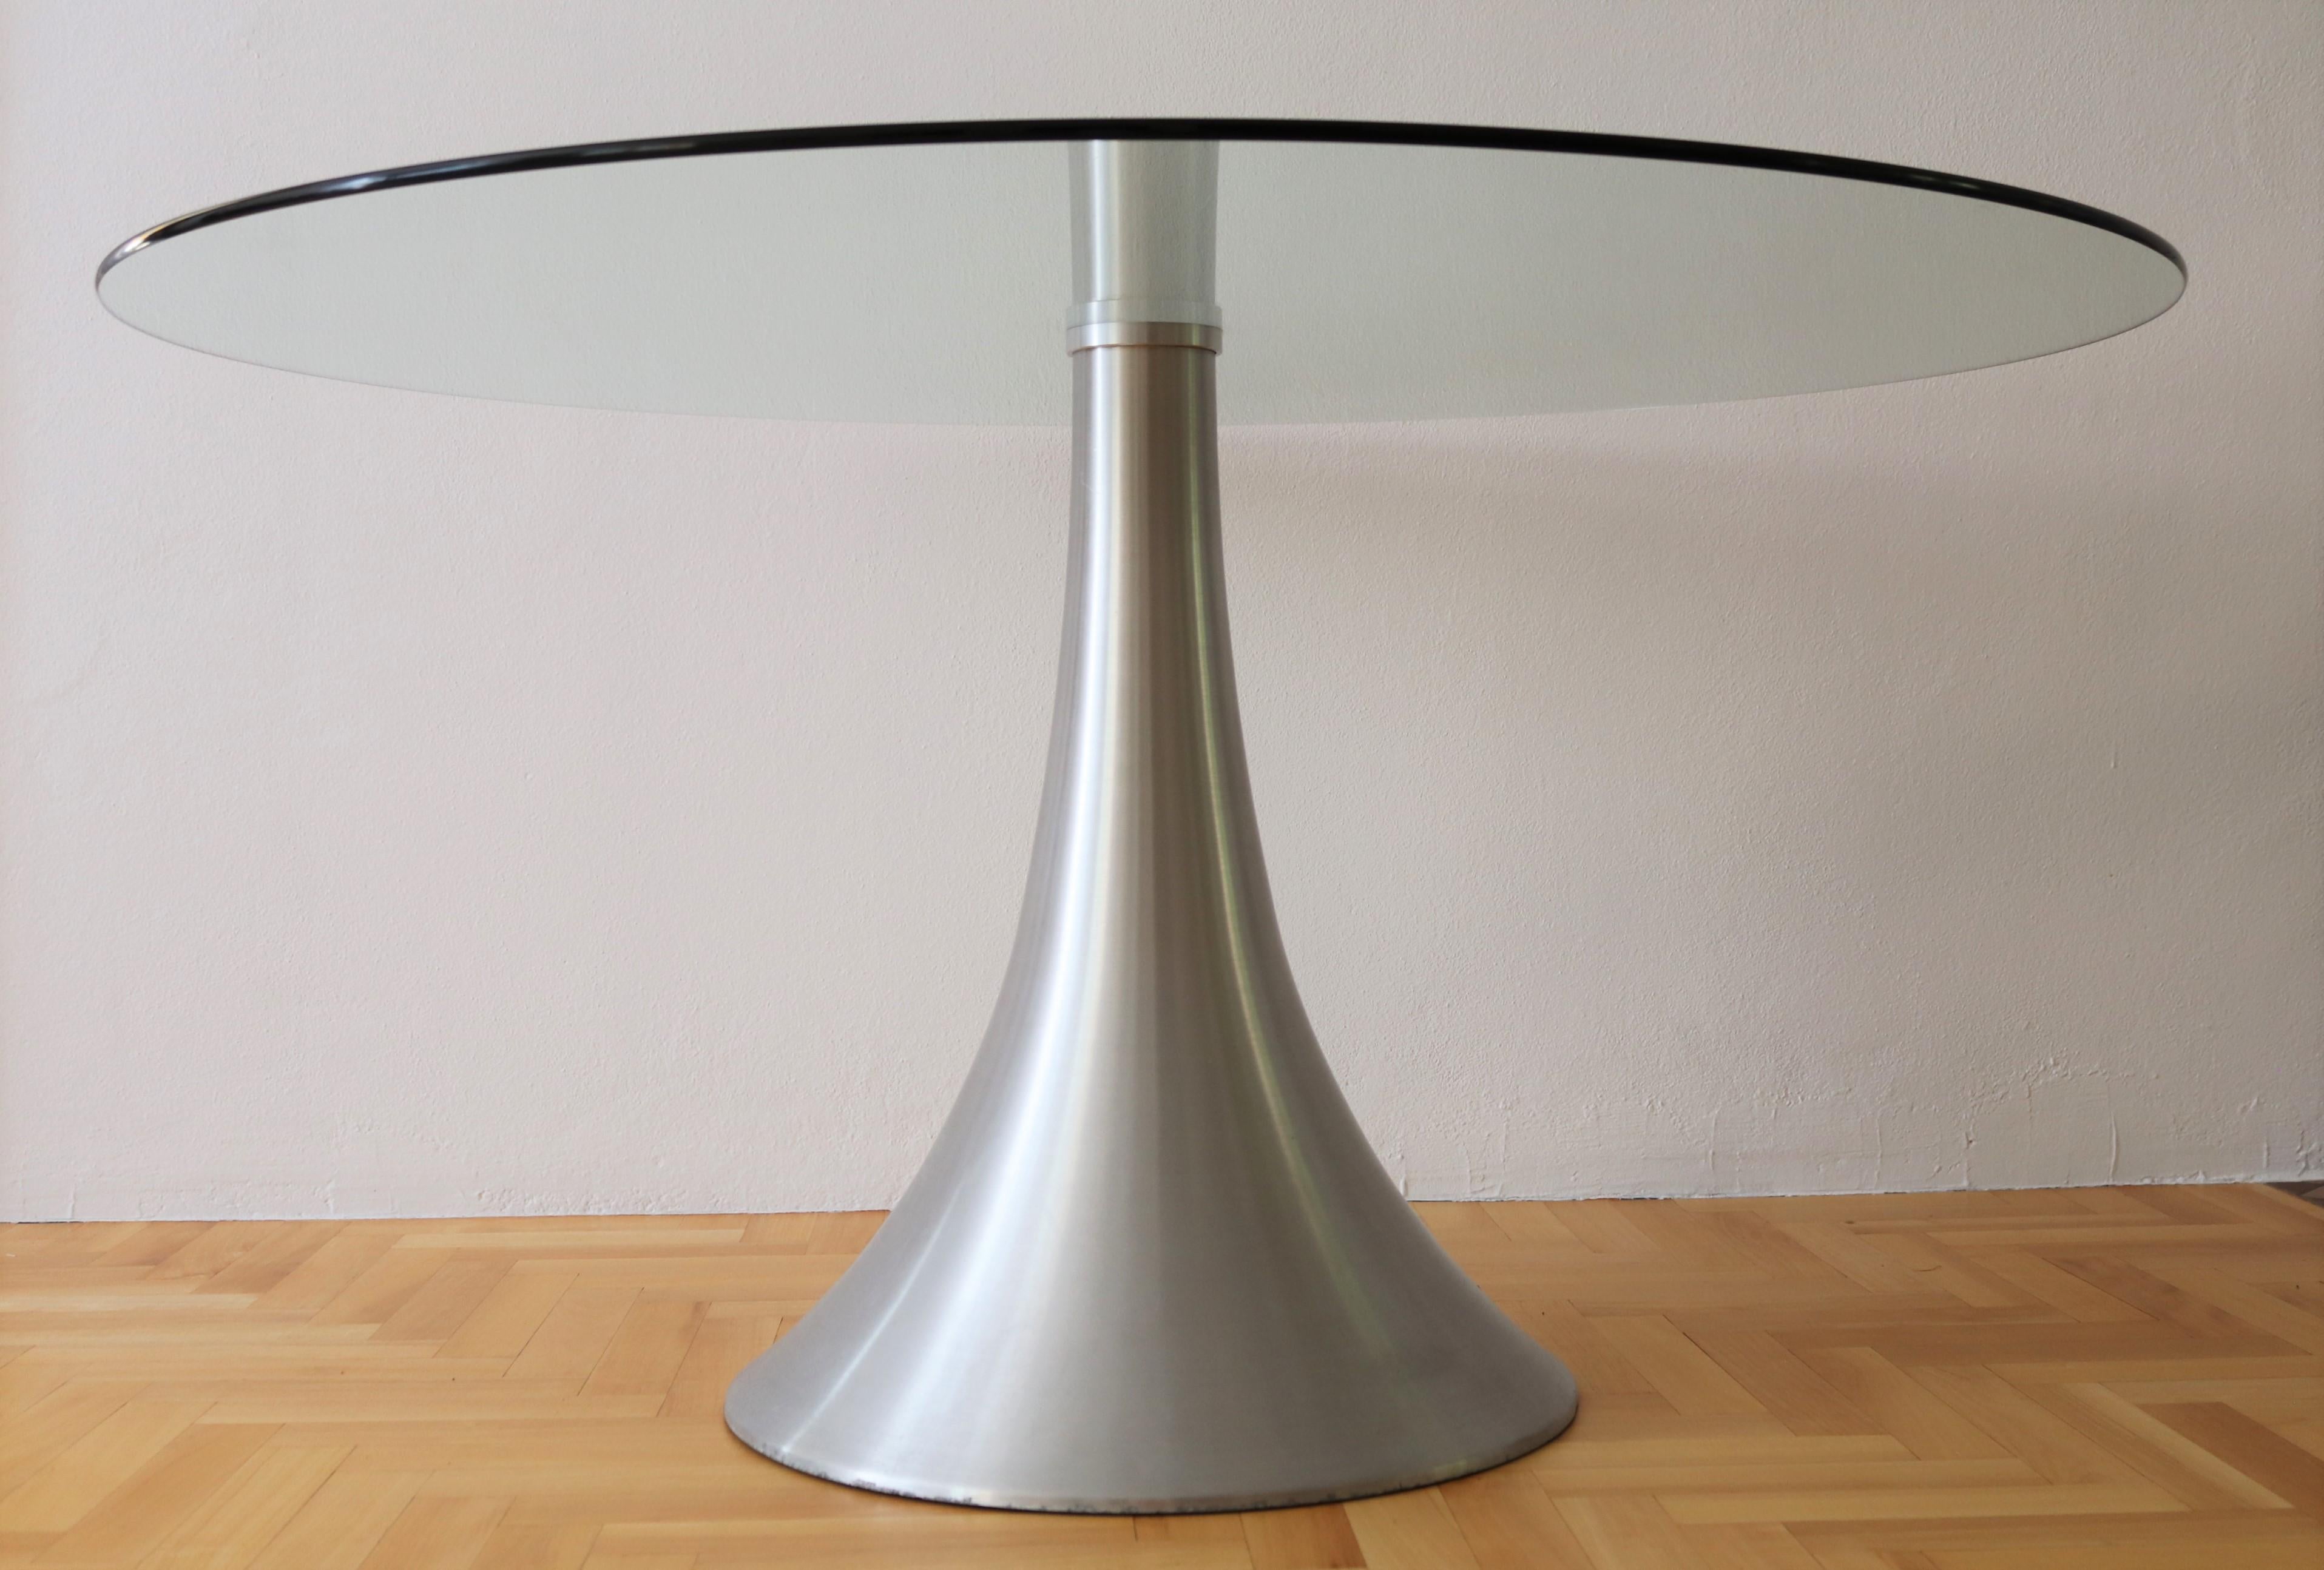 Aluminum Italian Dining or Center Table with Tulip Base and Glass Top, 1970s